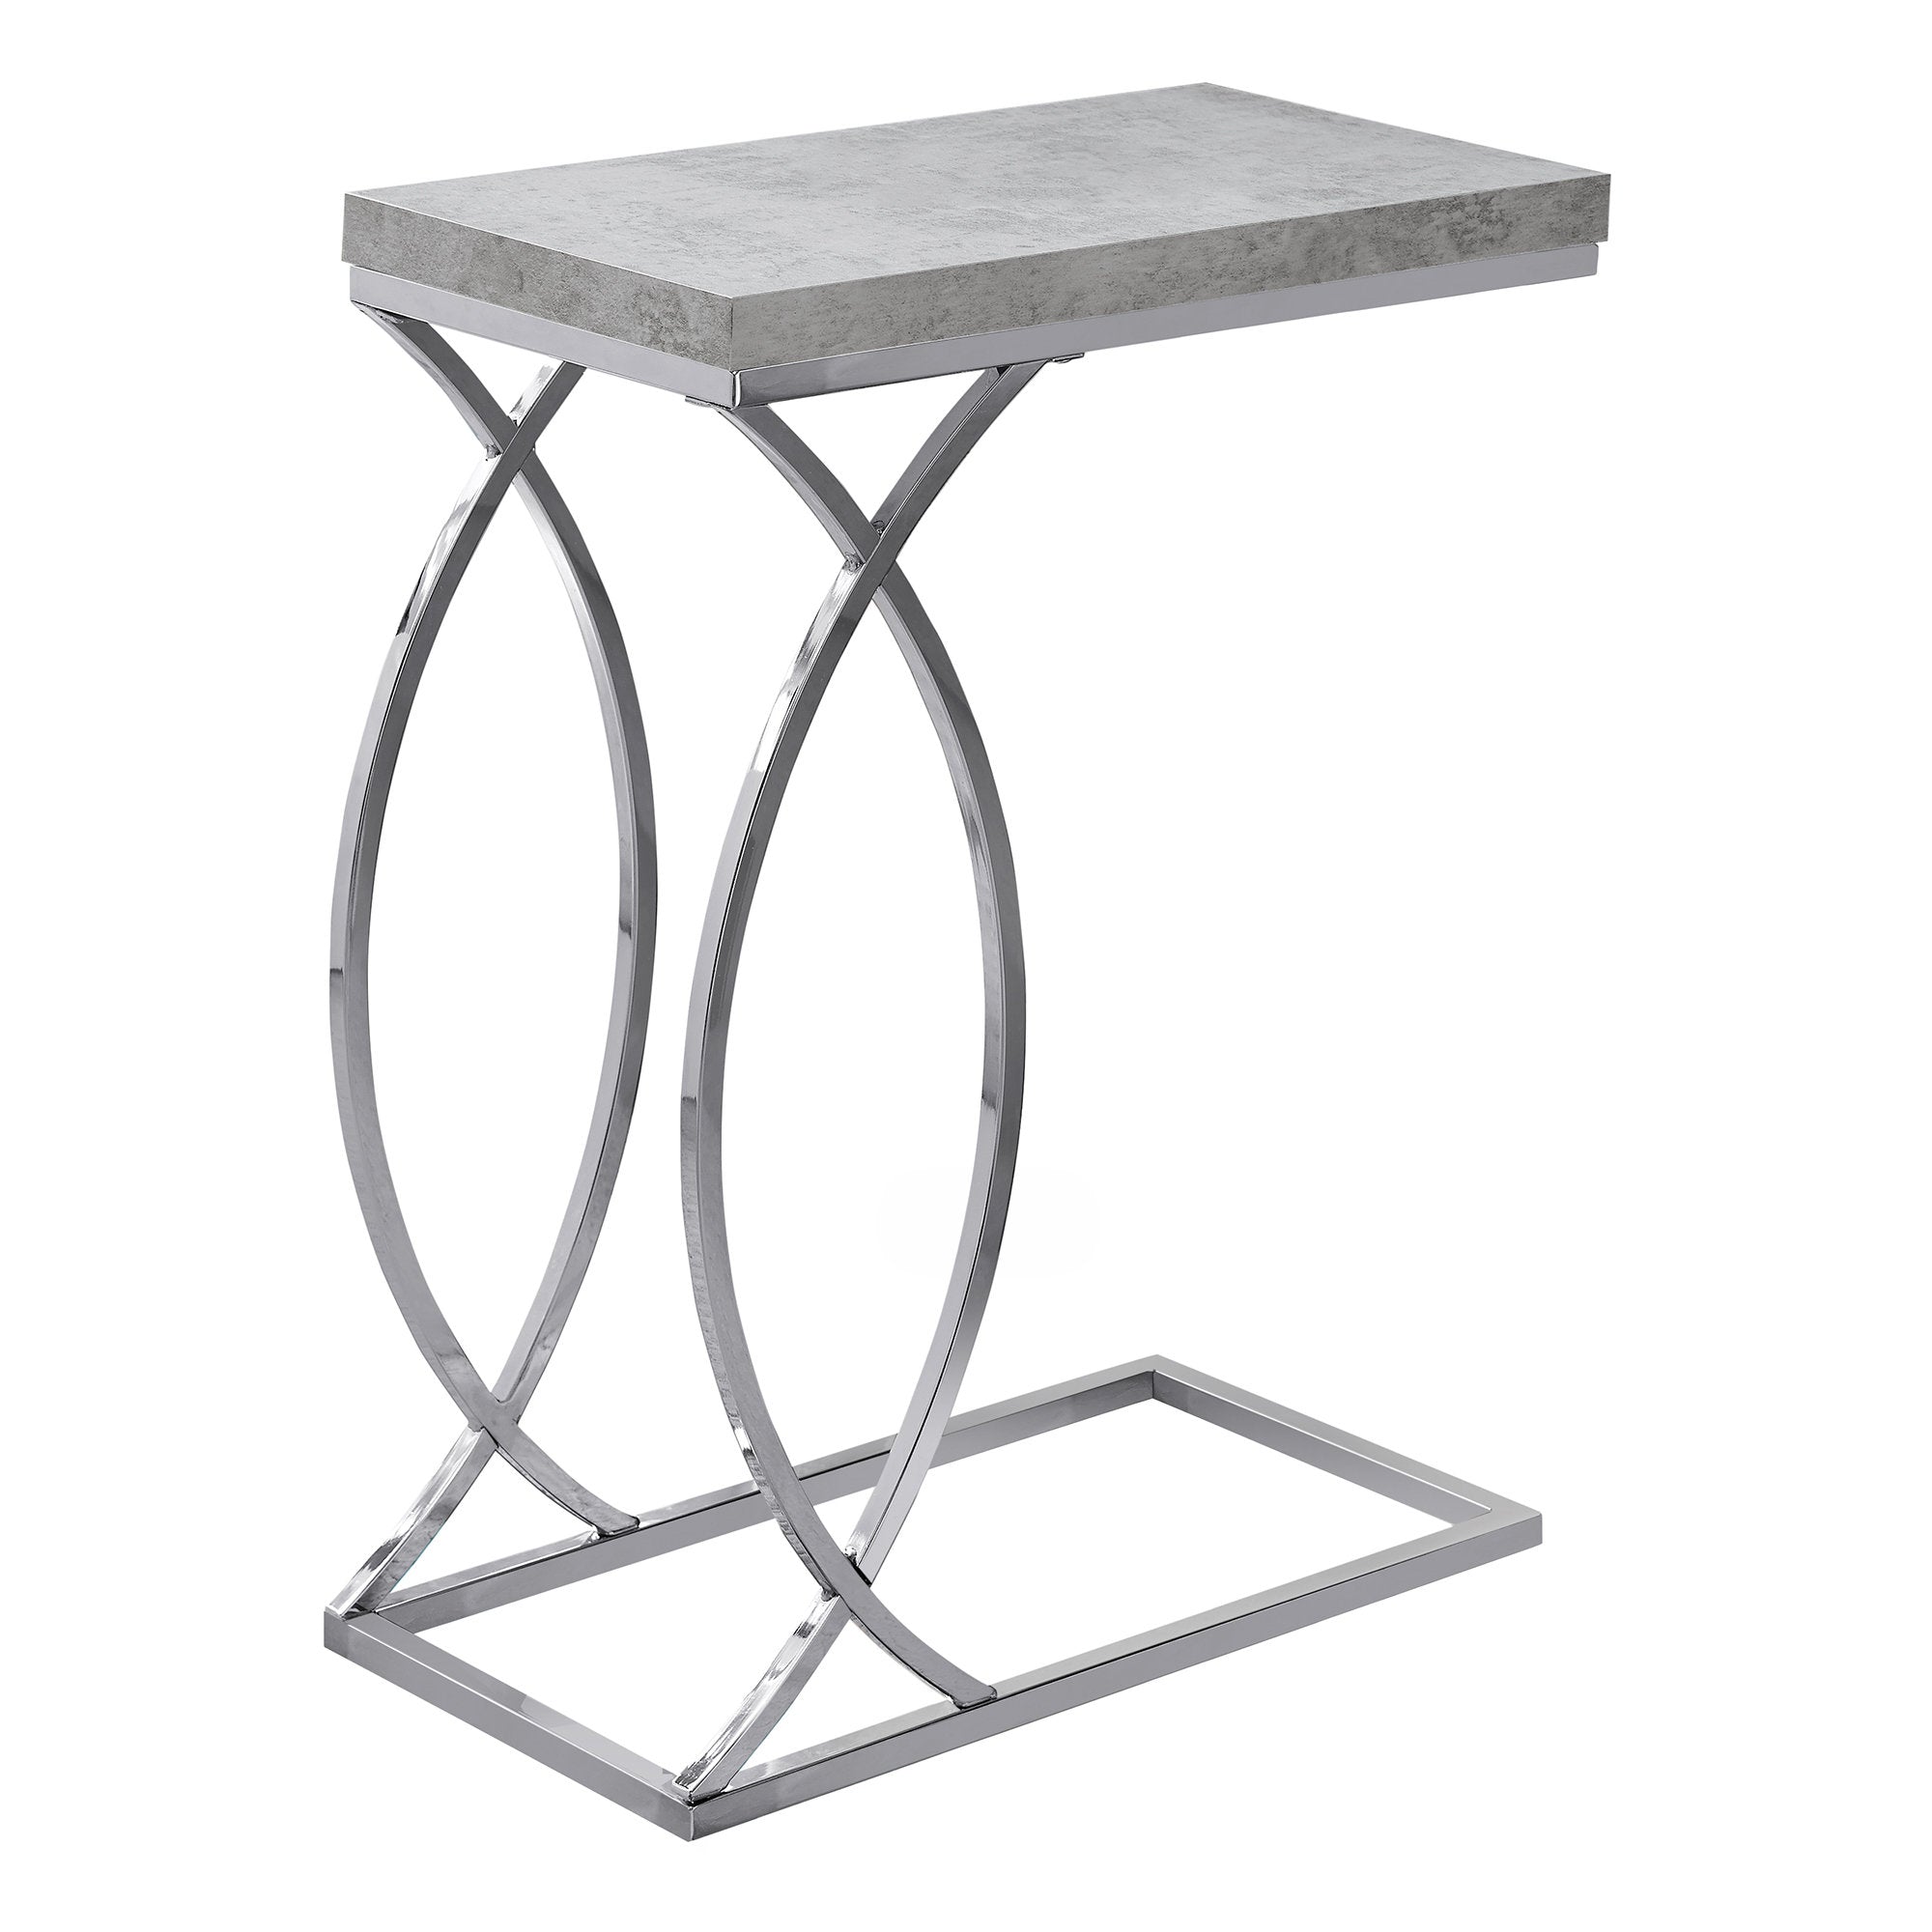 MN-613185    Accent Table, C-Shaped, End, Side, Snack, Living Room, Bedroom, Metal Legs, Laminate, Grey Cement Look, Chrome, Contemporary, Modern